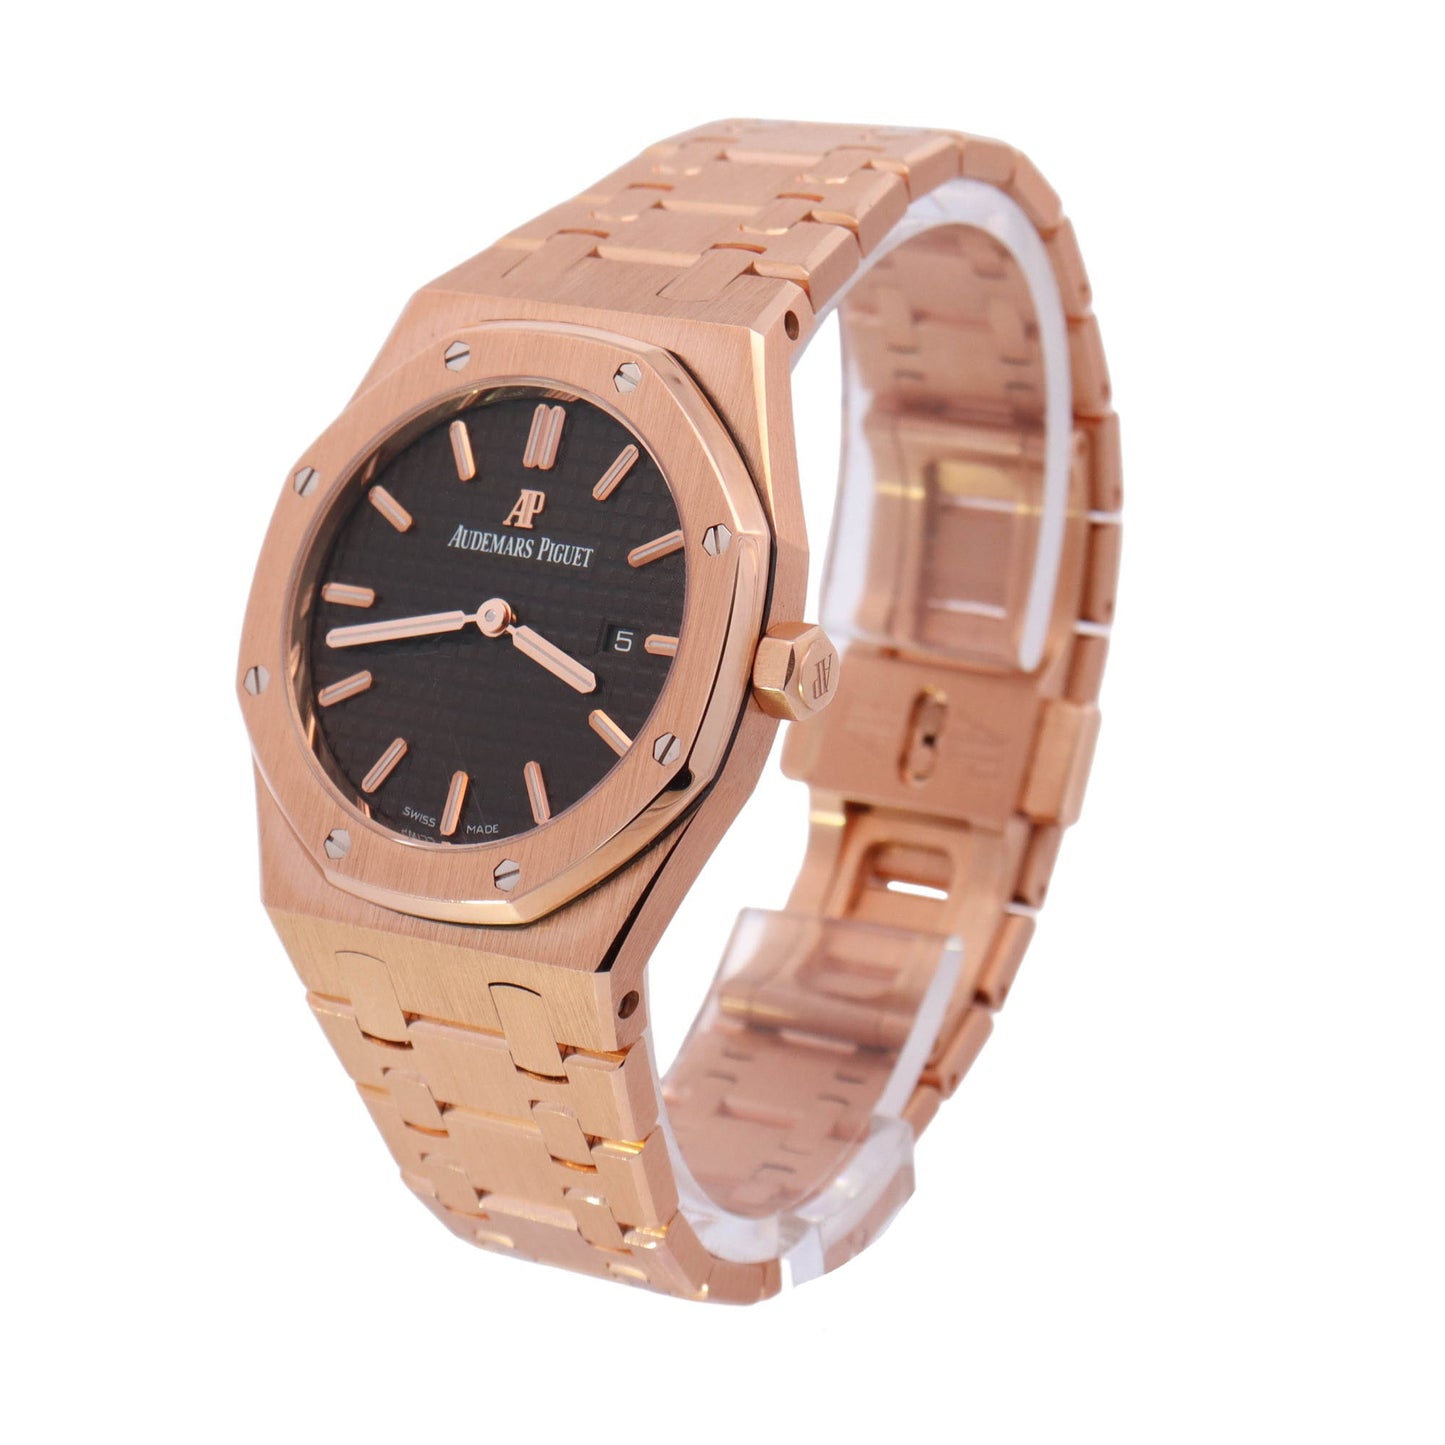 Audemars Piguet Royal Oak Rose Gold 33mm Chocolate Dial Watch Reference# 67650OR.OO.1261OR.01 - Happy Jewelers Fine Jewelry Lifetime Warranty